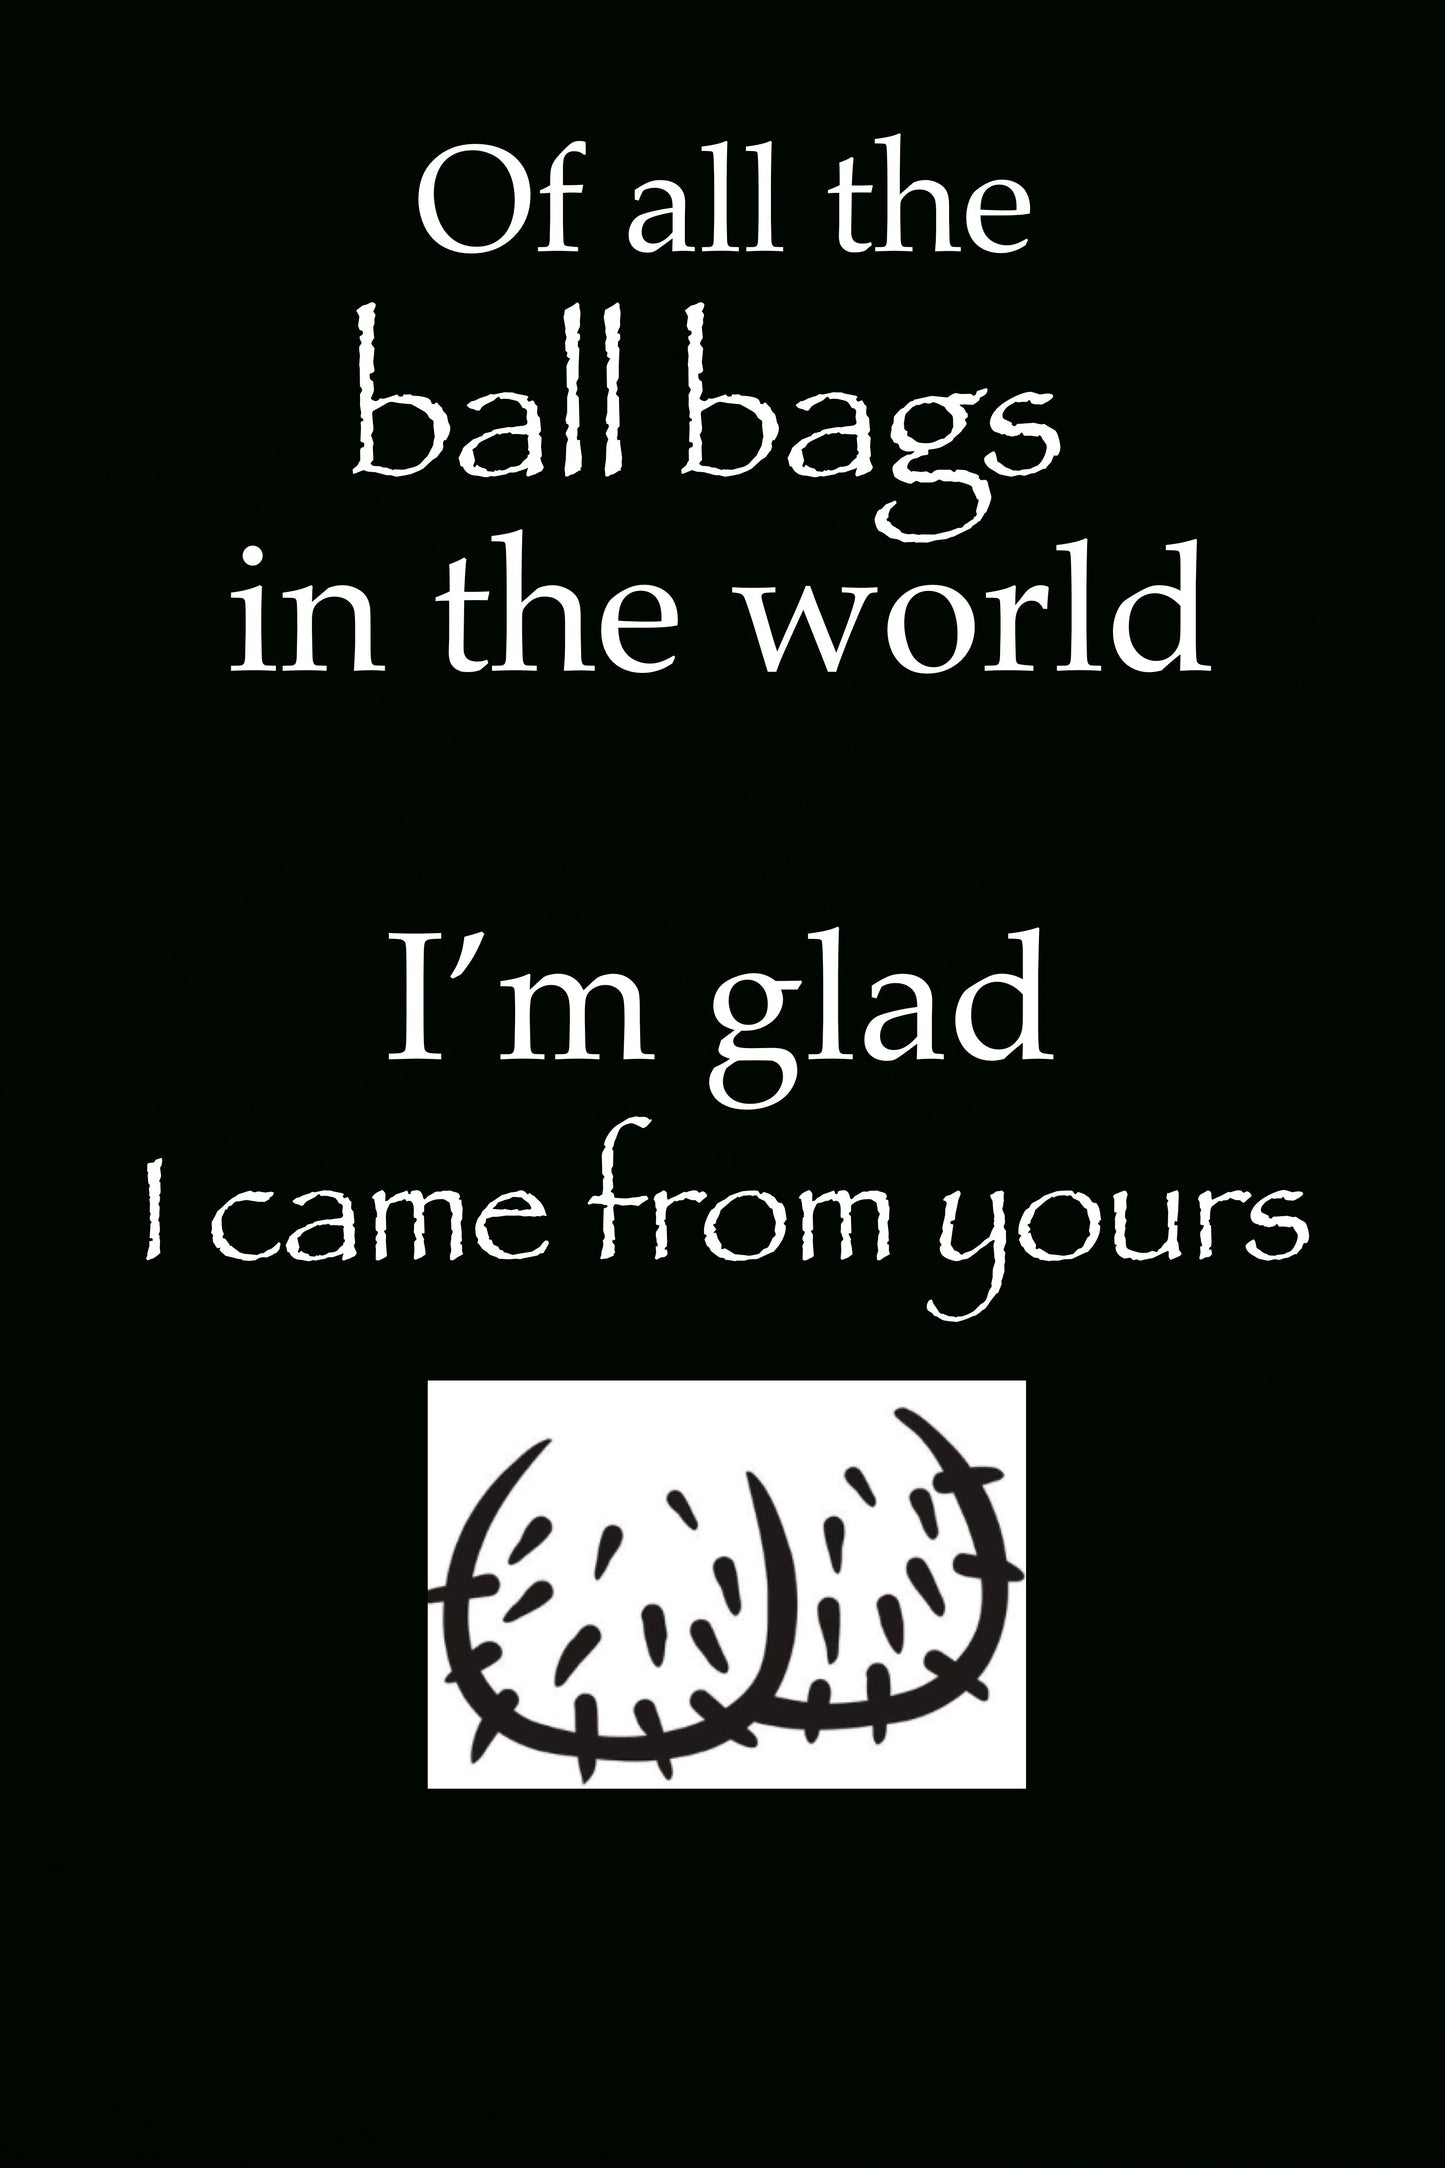 Of all the ball bags